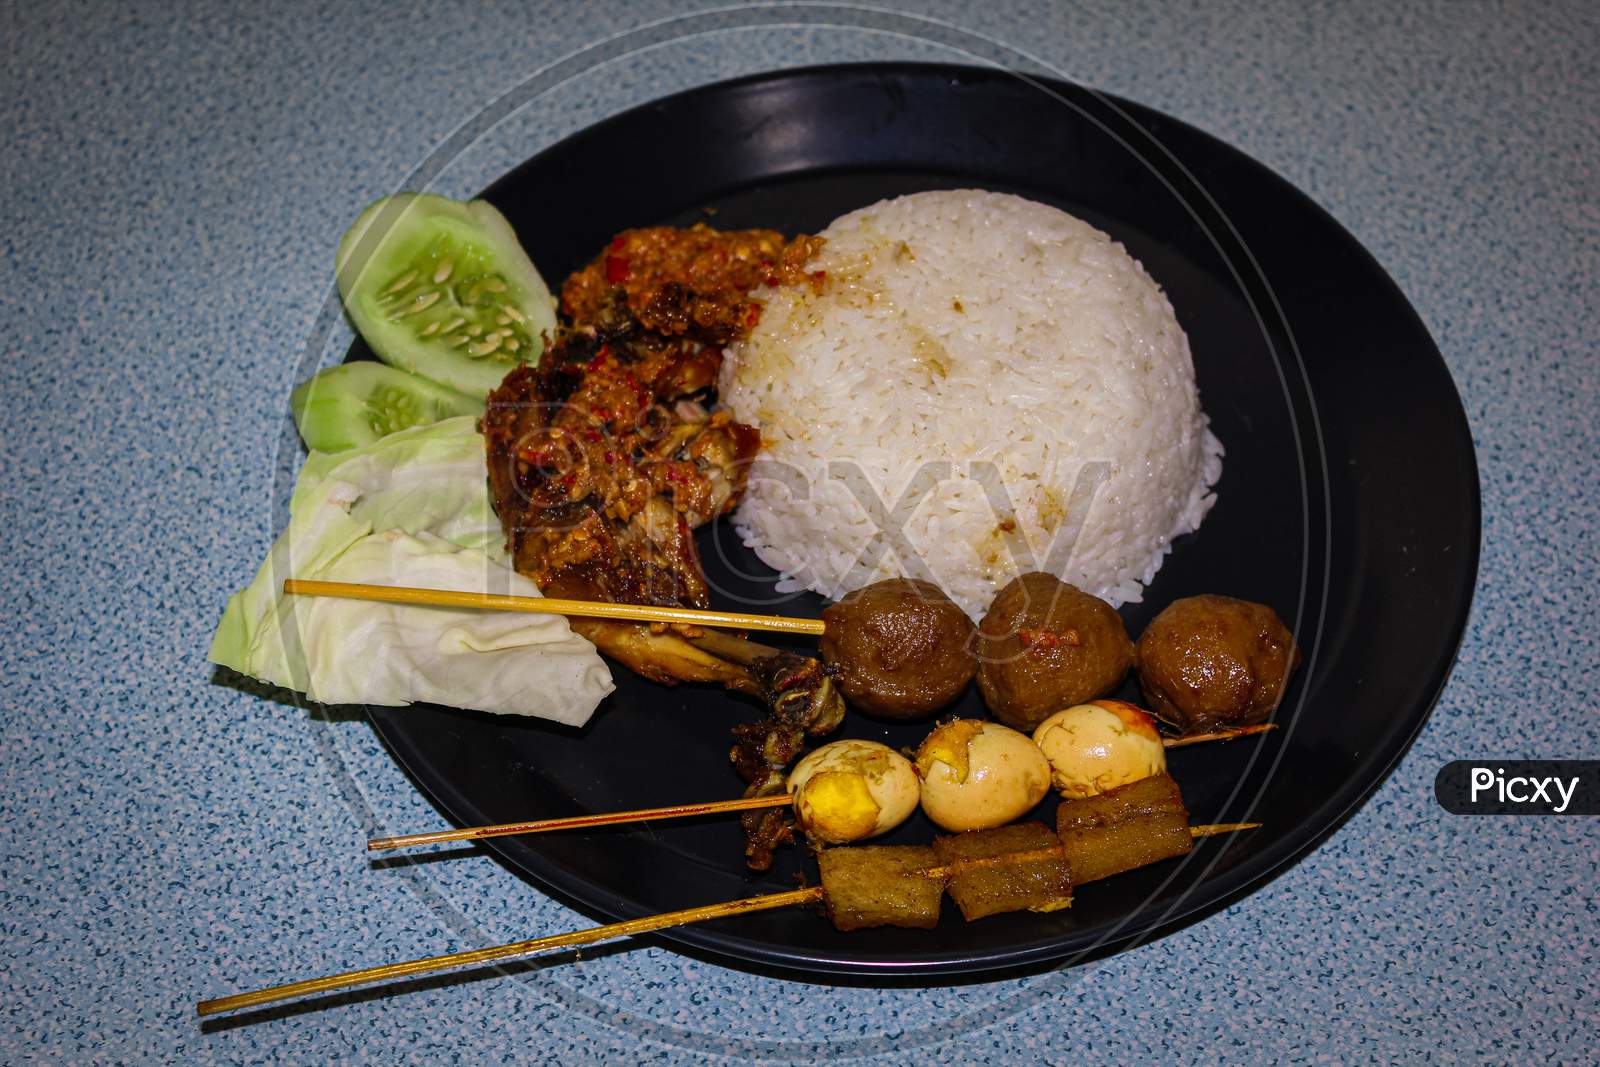 Complete penyet sauce fried chicken nasi rames (indonesian food)